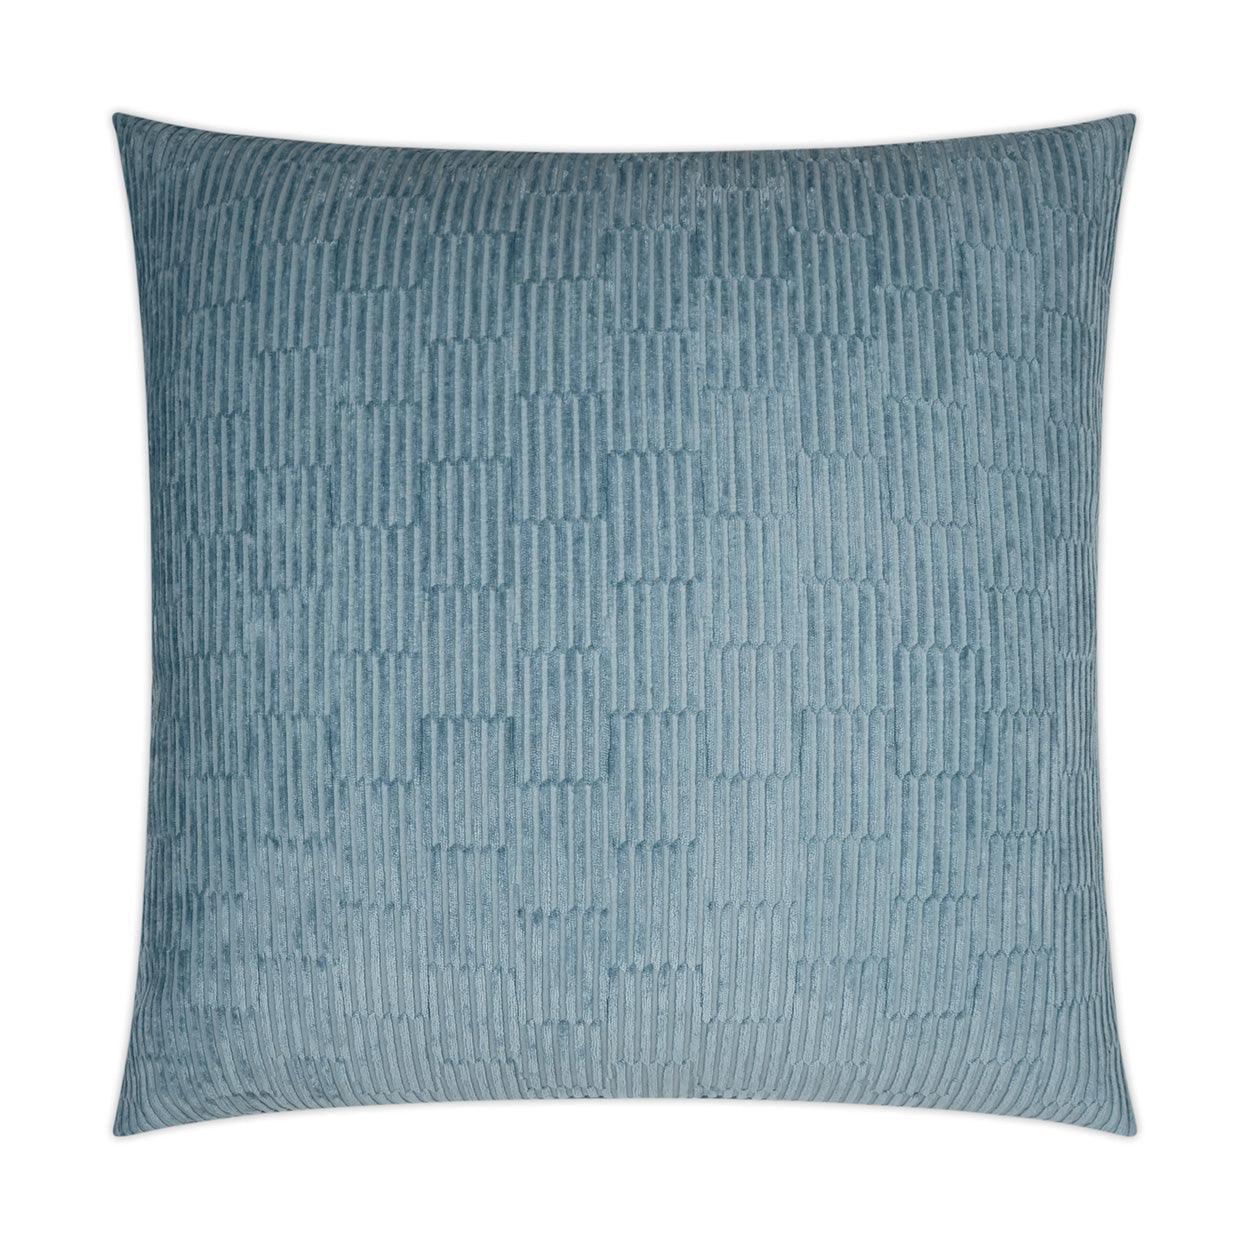 Coloroid Lagoon Solid Textured Blue Large Throw Pillow With Insert - Uptown Sebastian